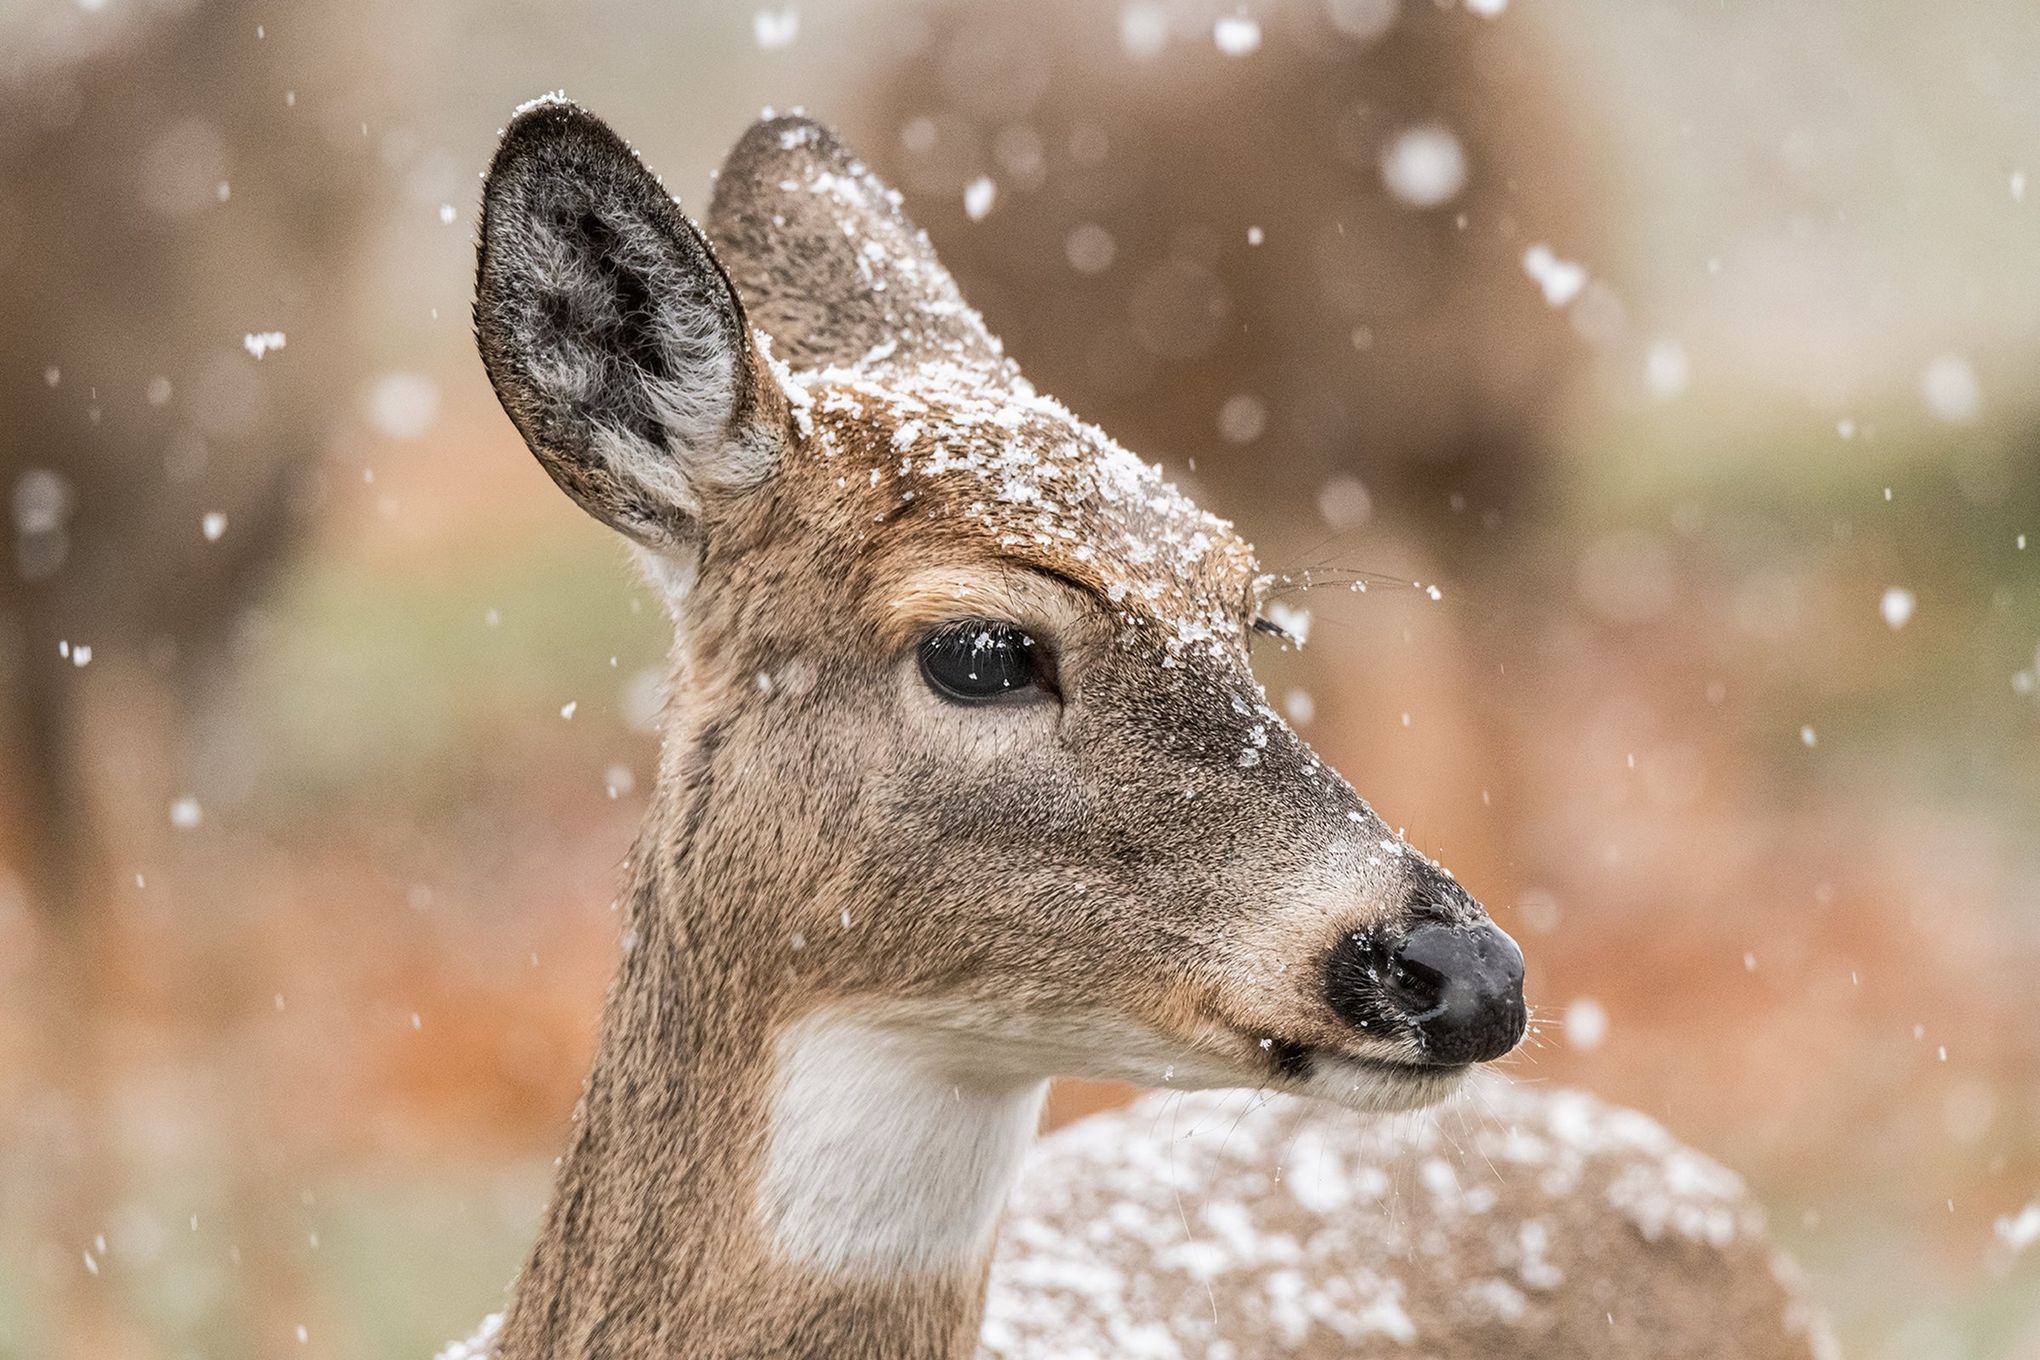 This snowy white-tailed deer is cute enough to melt the chill of